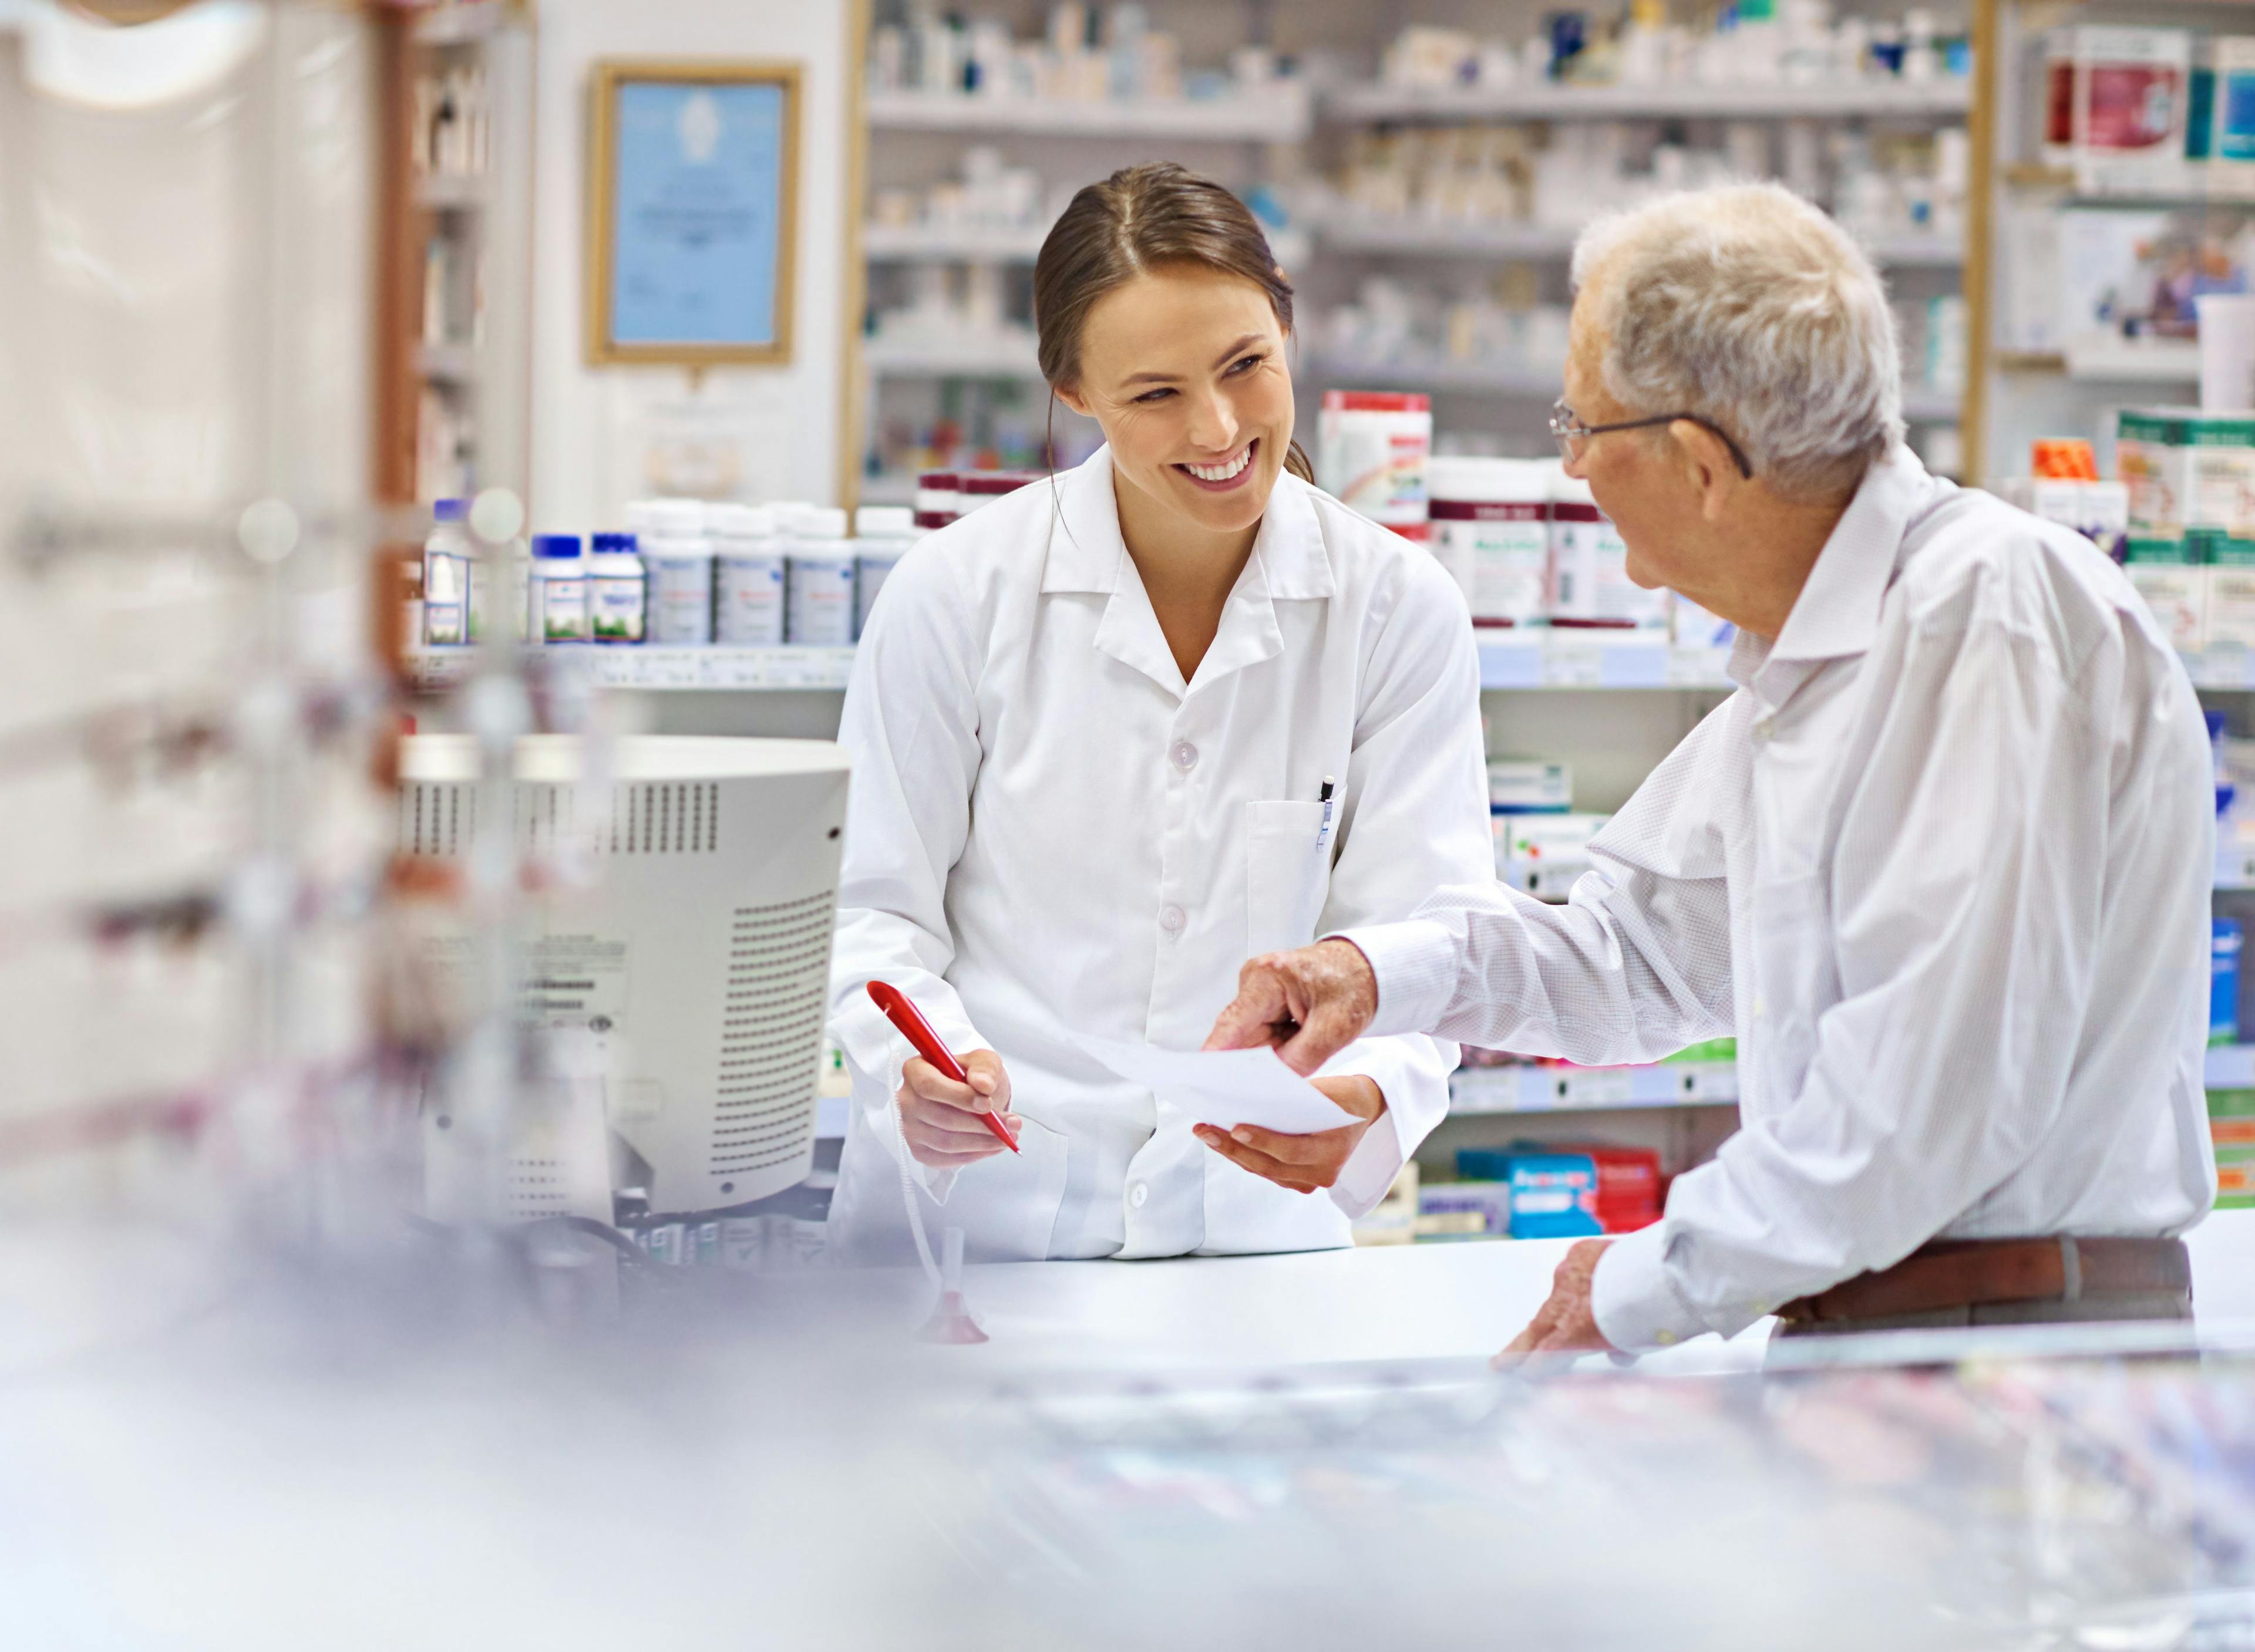 Are Wellness and Proactive Health the Future of Pharmacy?